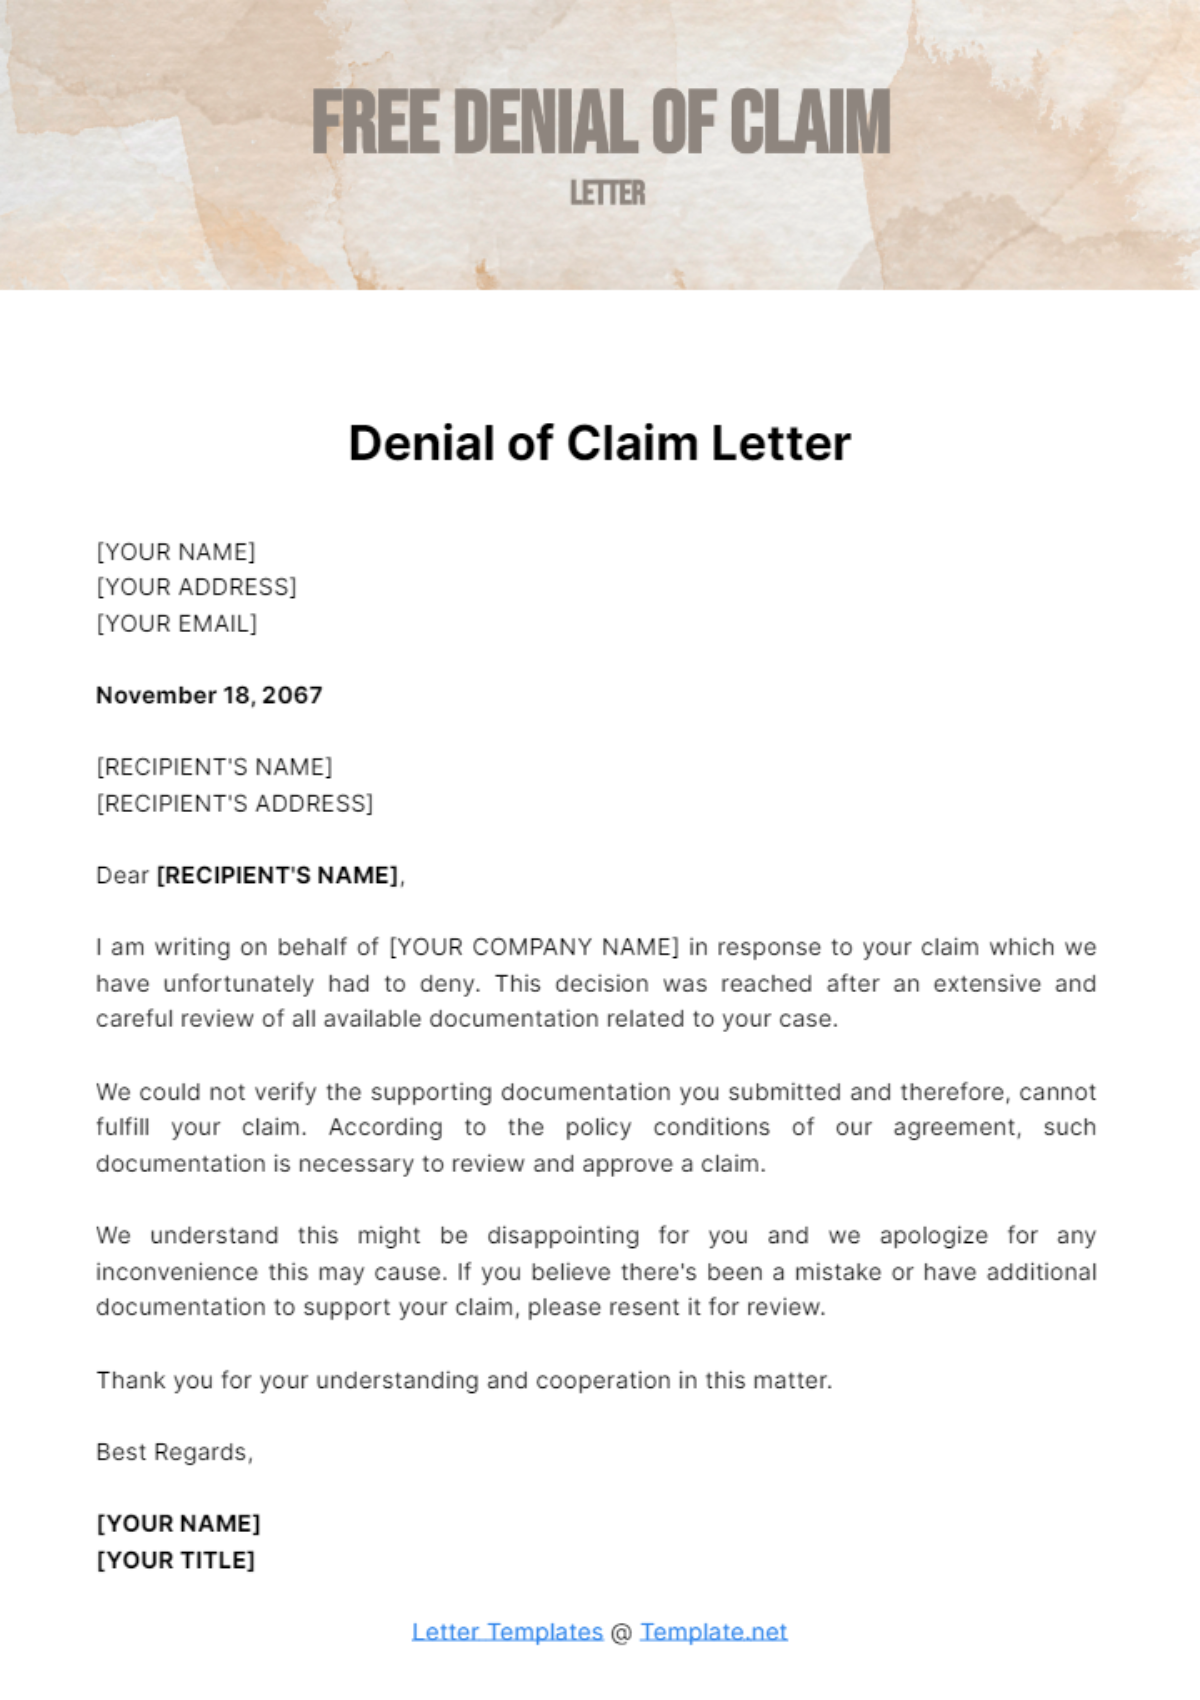 Denial of Claim Letter Template